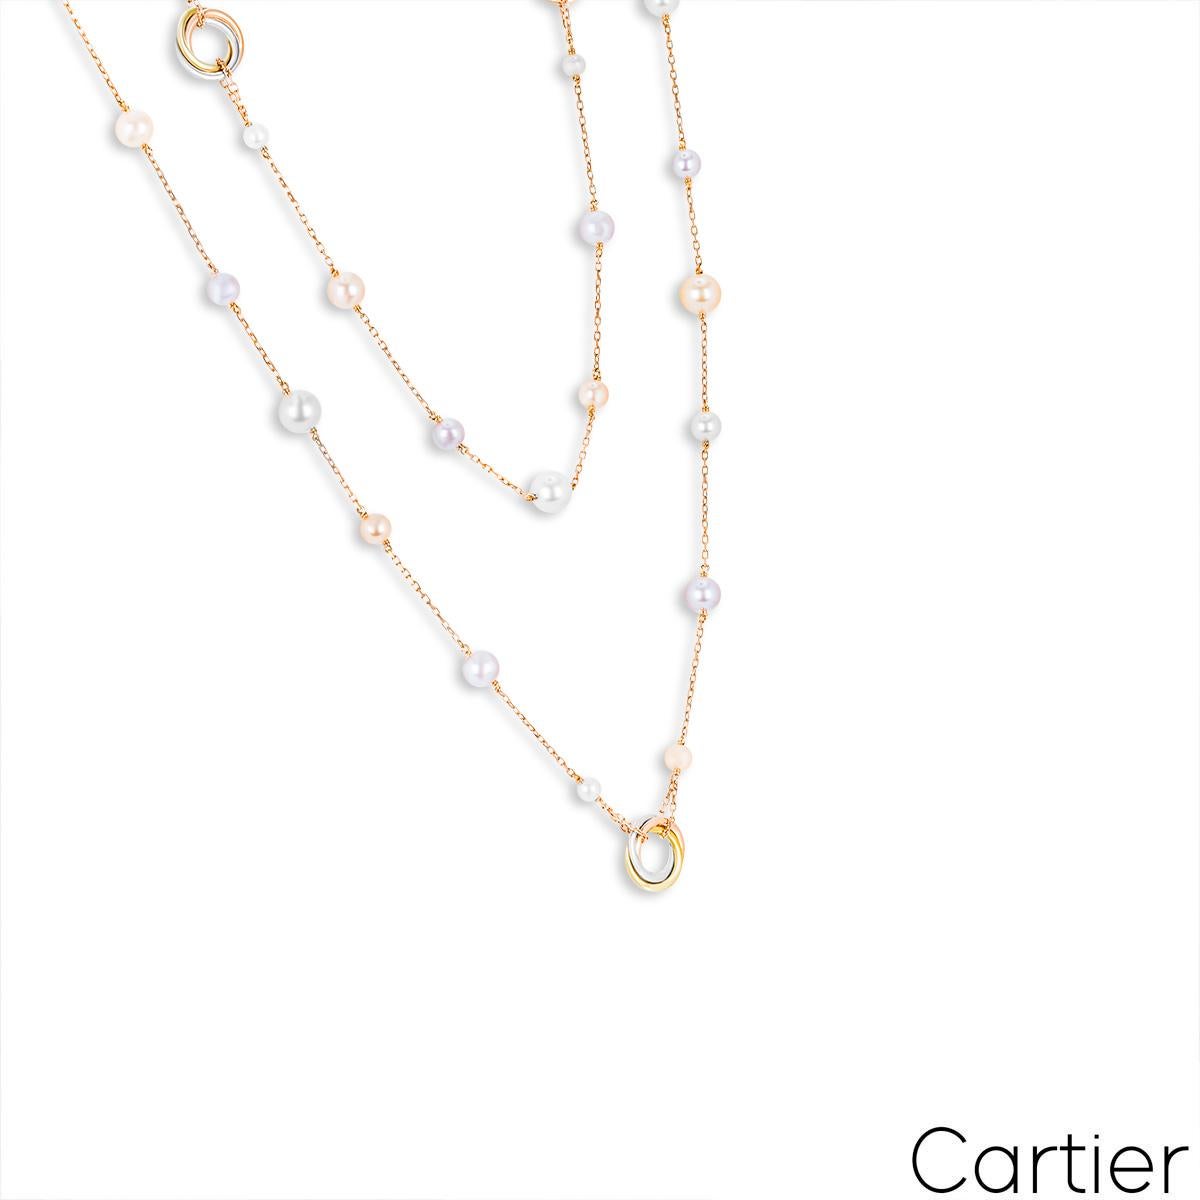 A beautiful 18k rose gold pearl necklace by Cartier from the Trinity de Cartier collection. The necklace is composed of 5 stations of three tri-colour gold intertwining circular motifs. Between each Trinity motif are 7 pearls evenly spaced